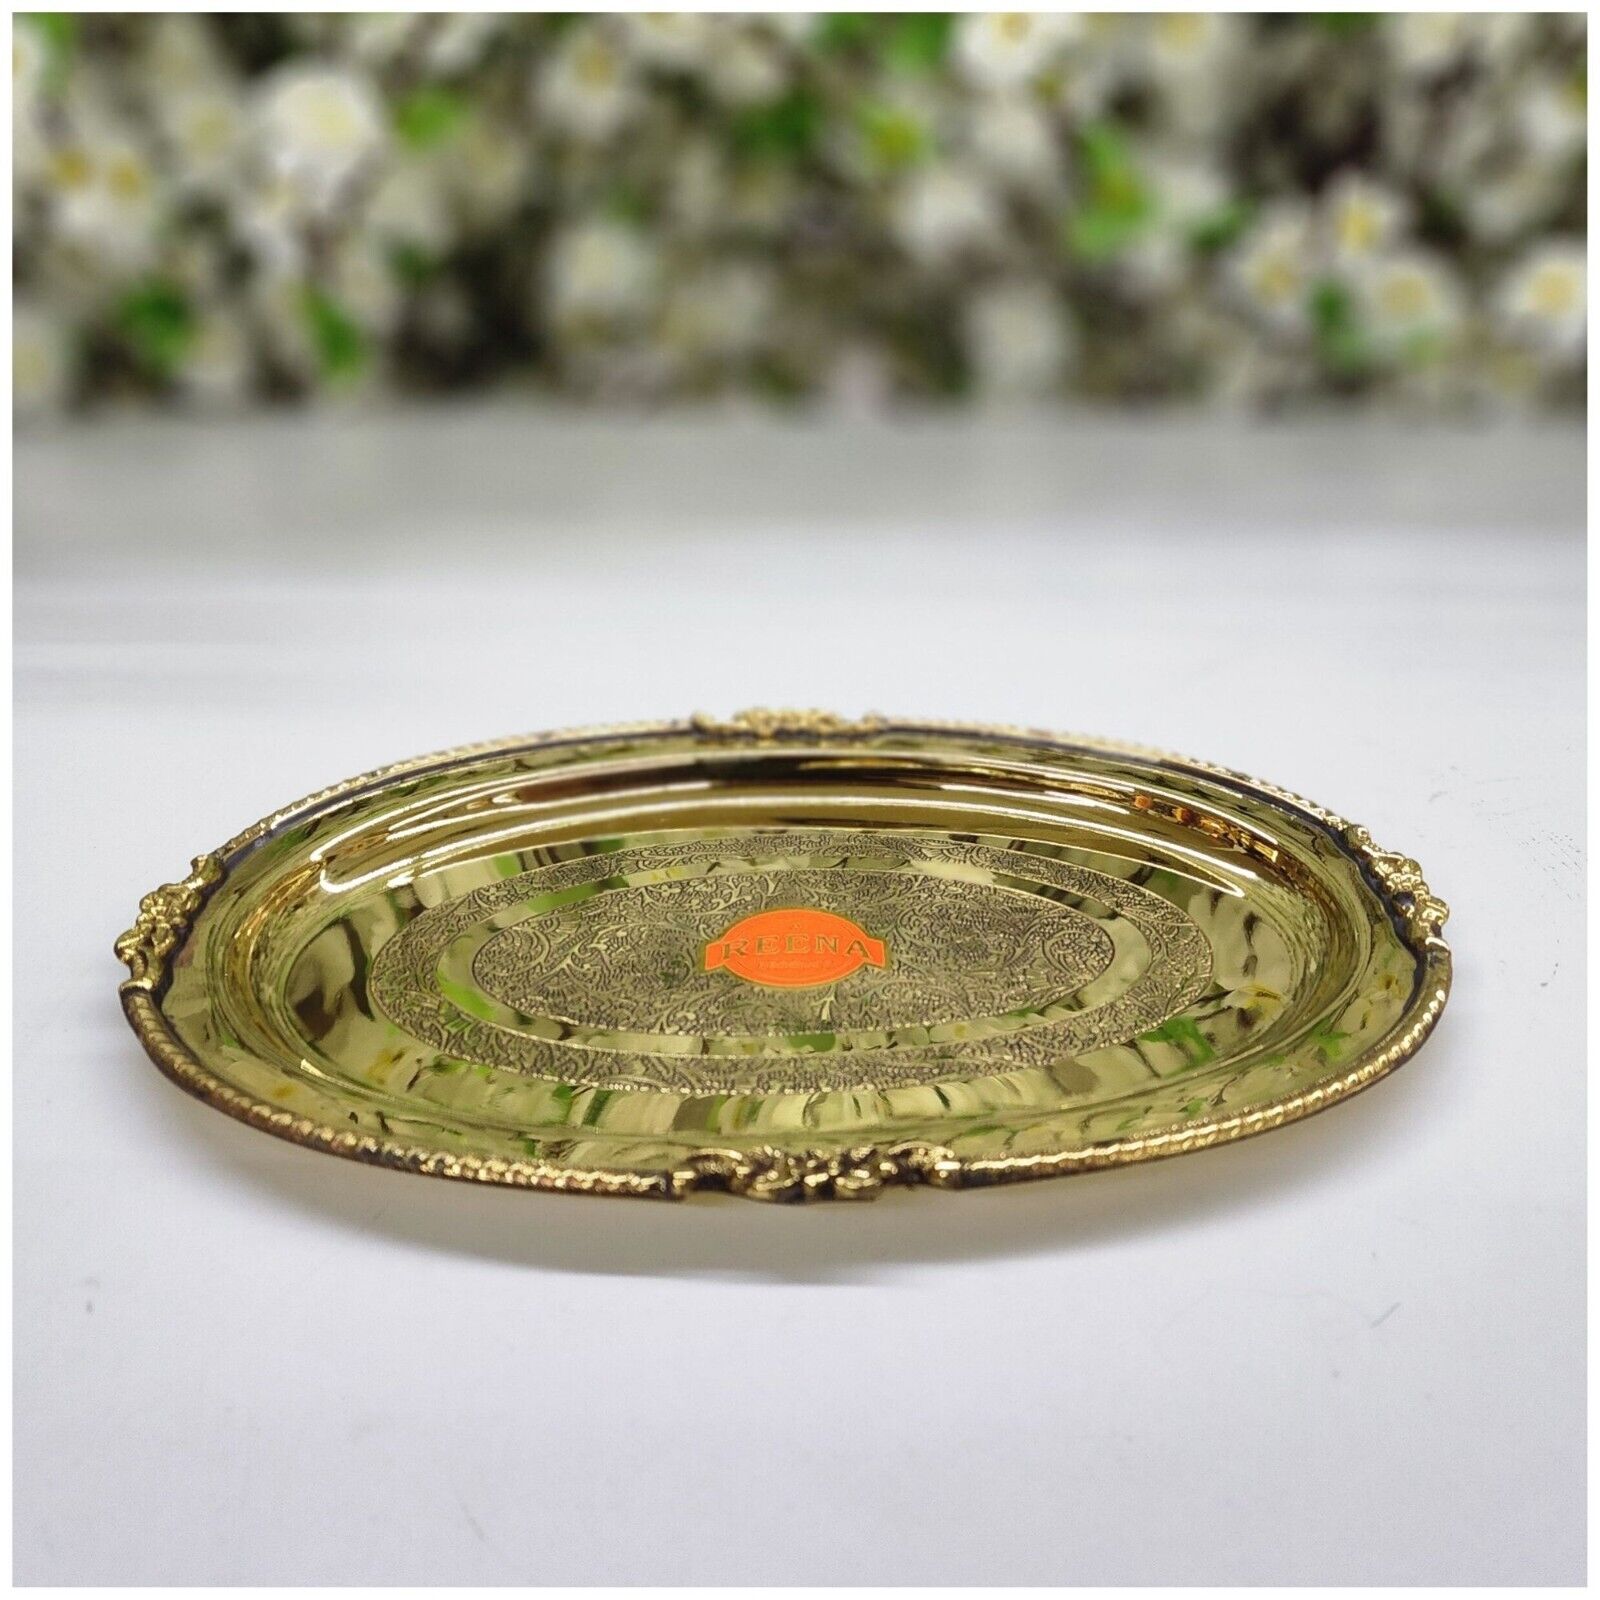 Brass Tray Oval Serving Tray Handcrafted Coffee Tray Decorated Engraved Tray